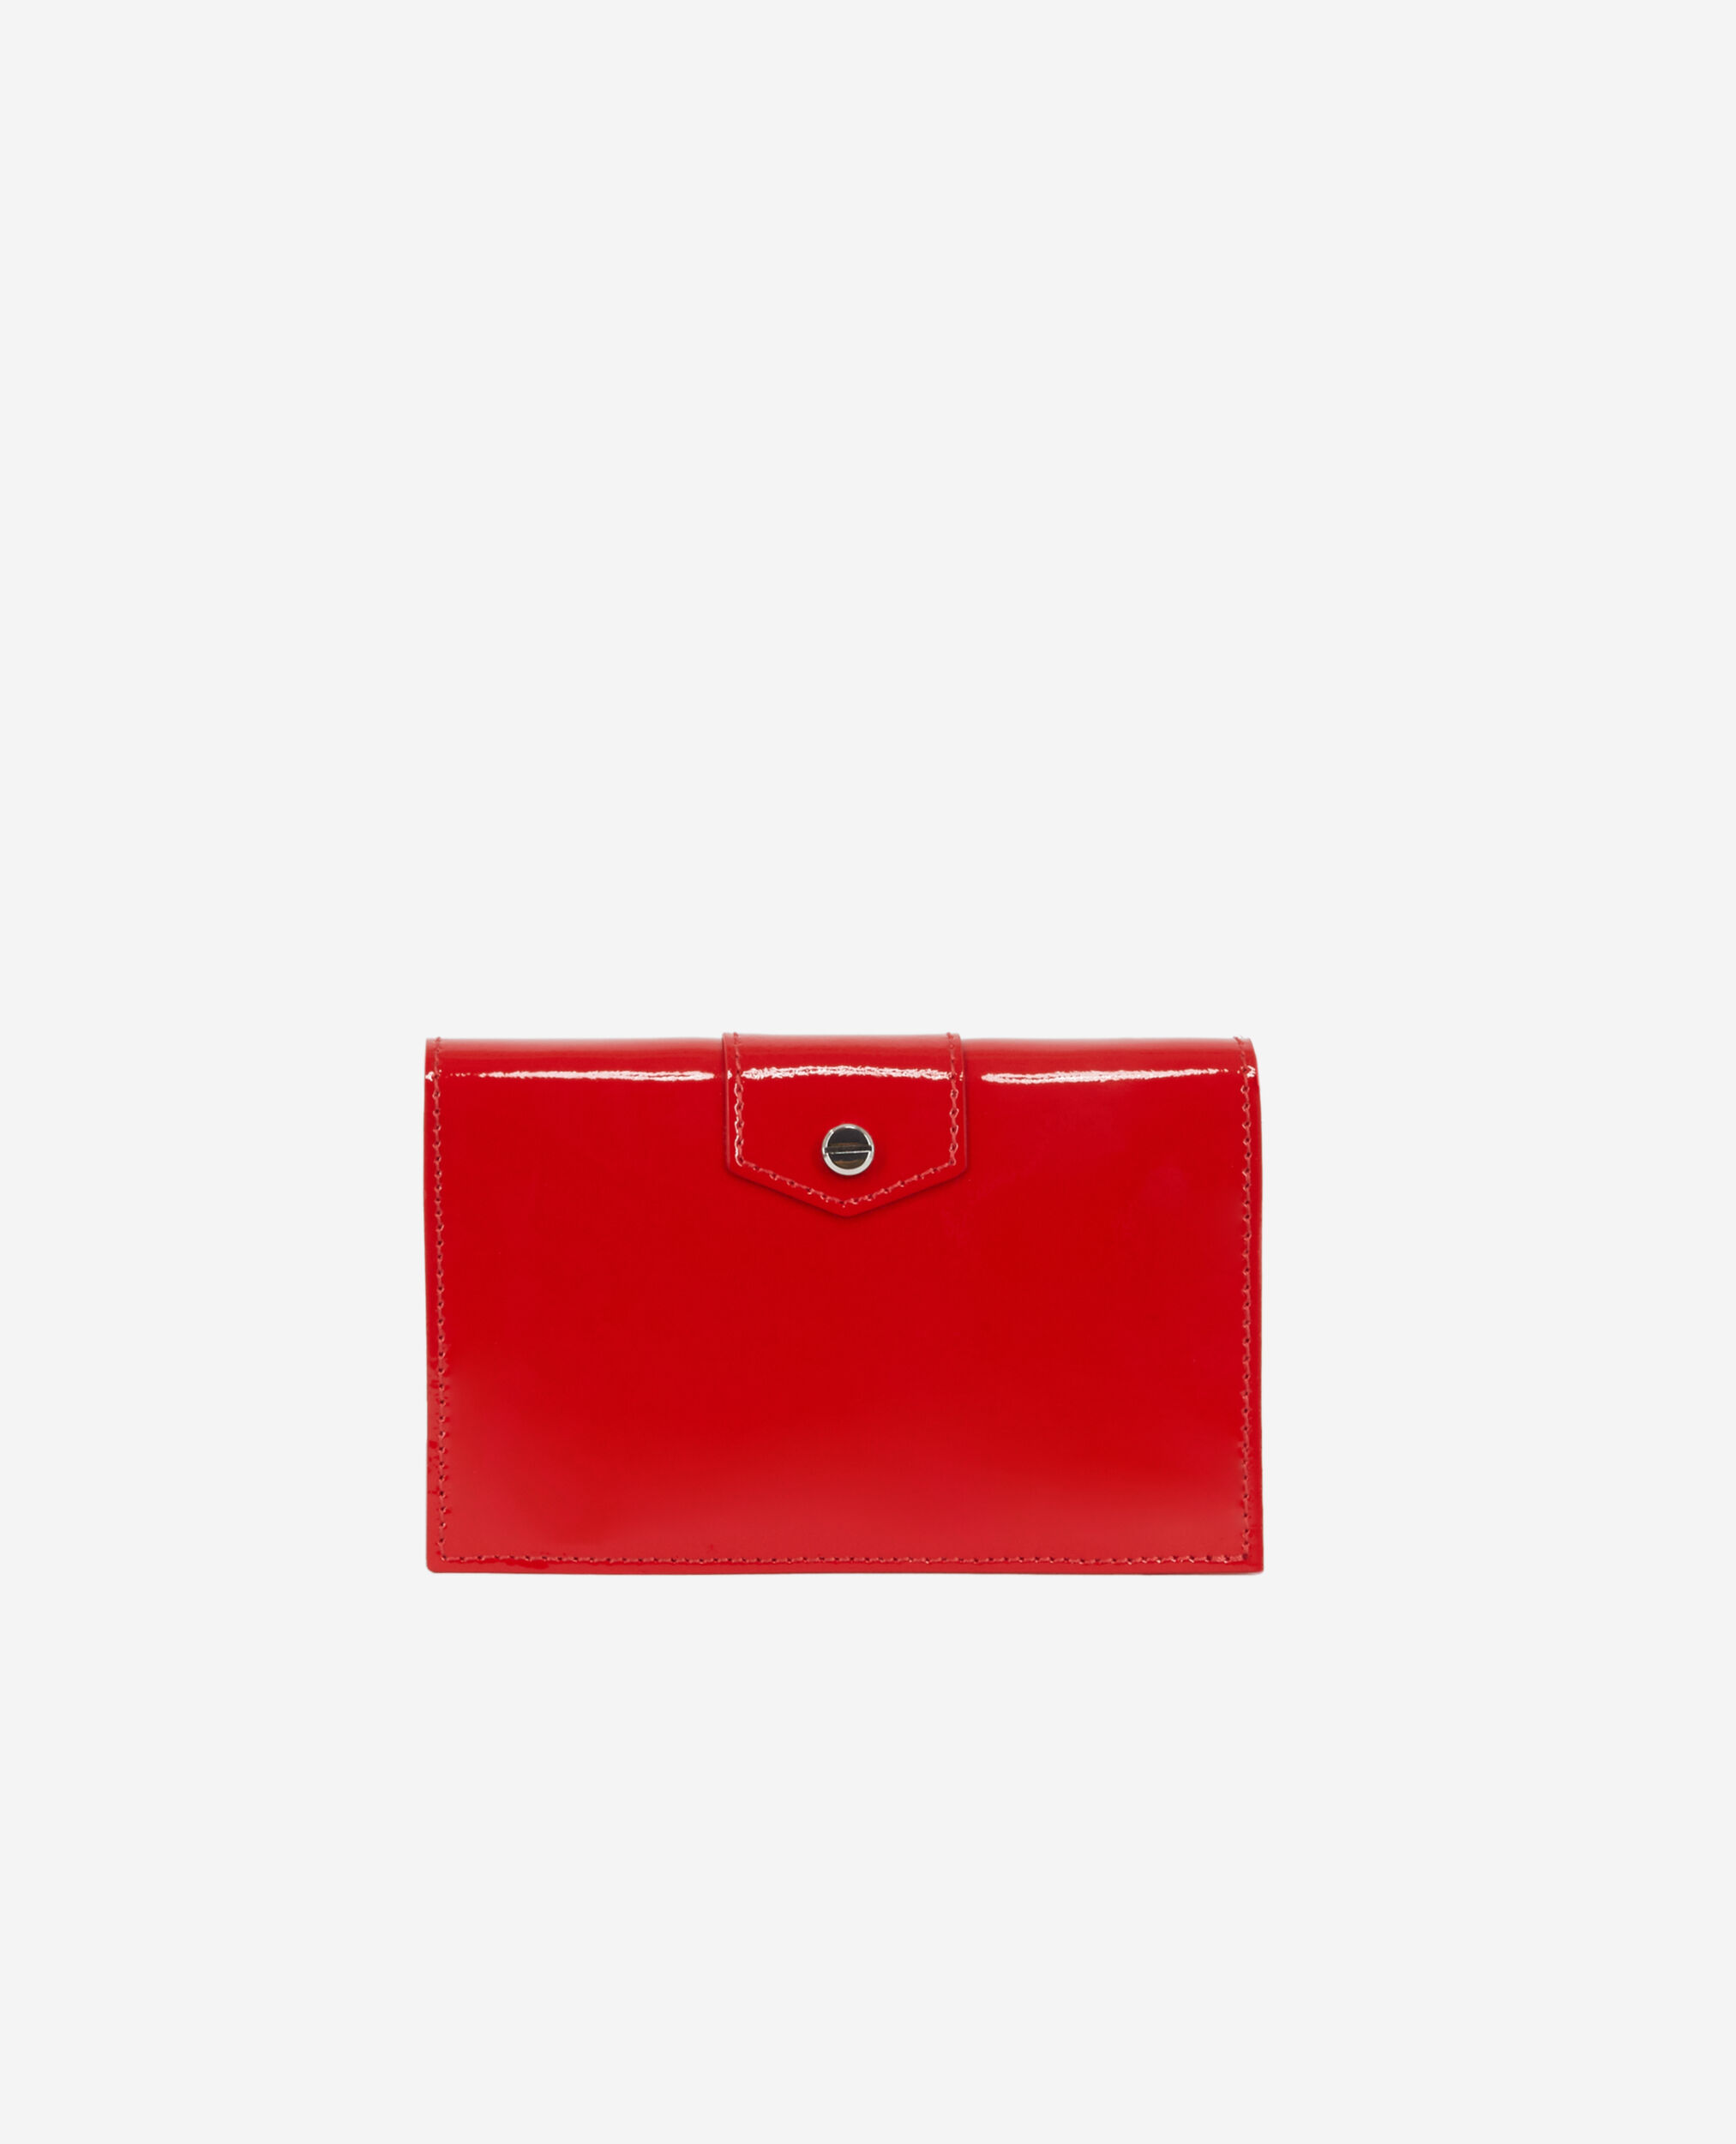 Pochette Emily small en cuir rouge, RED, hi-res image number null